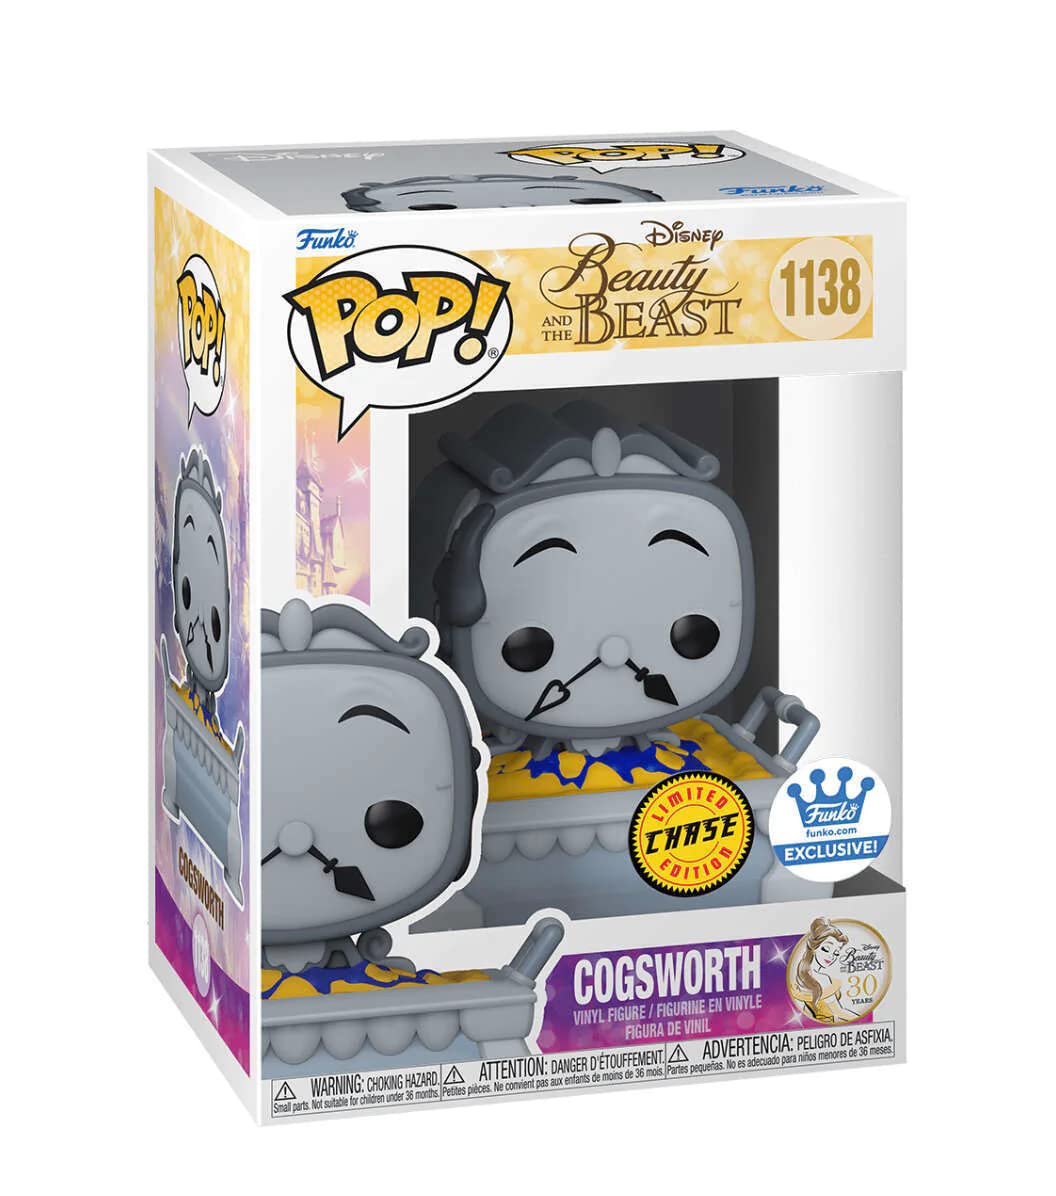 Funko POP! Disney Beauty And The Beast CHASE Cogsworth #1138 Exclusive